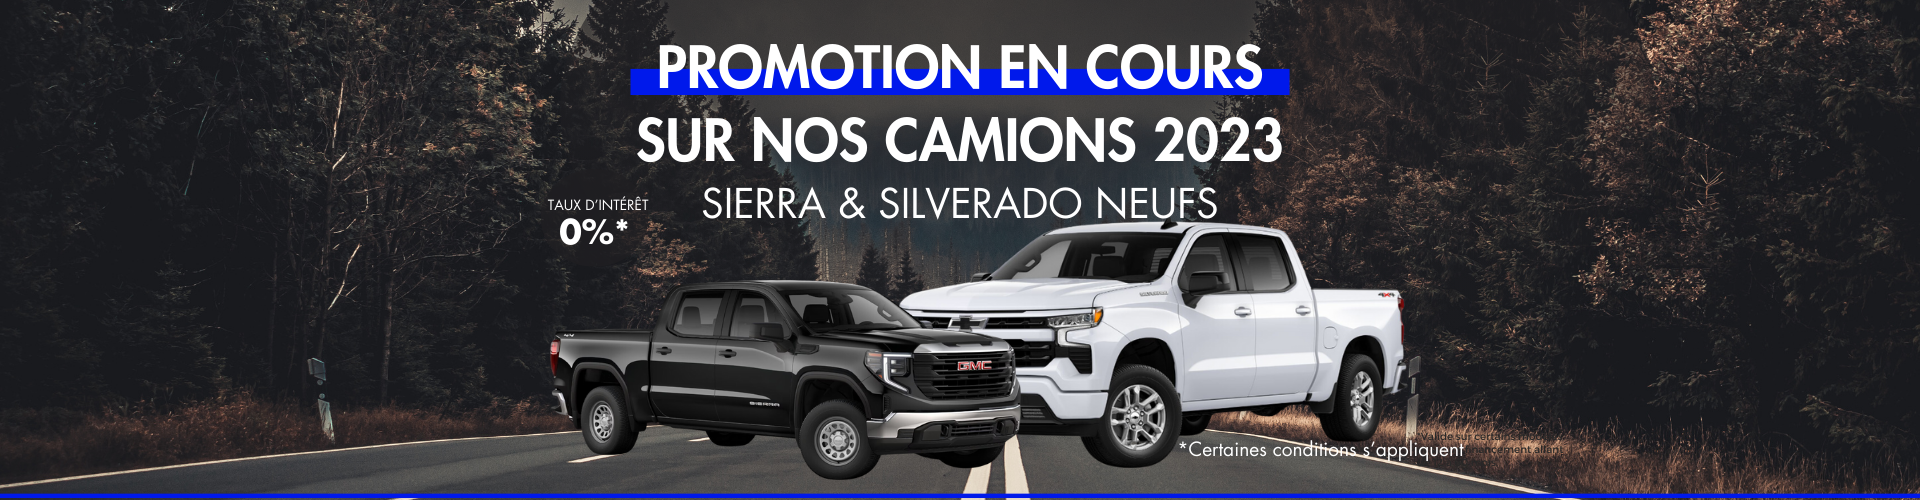 Promo camion 23